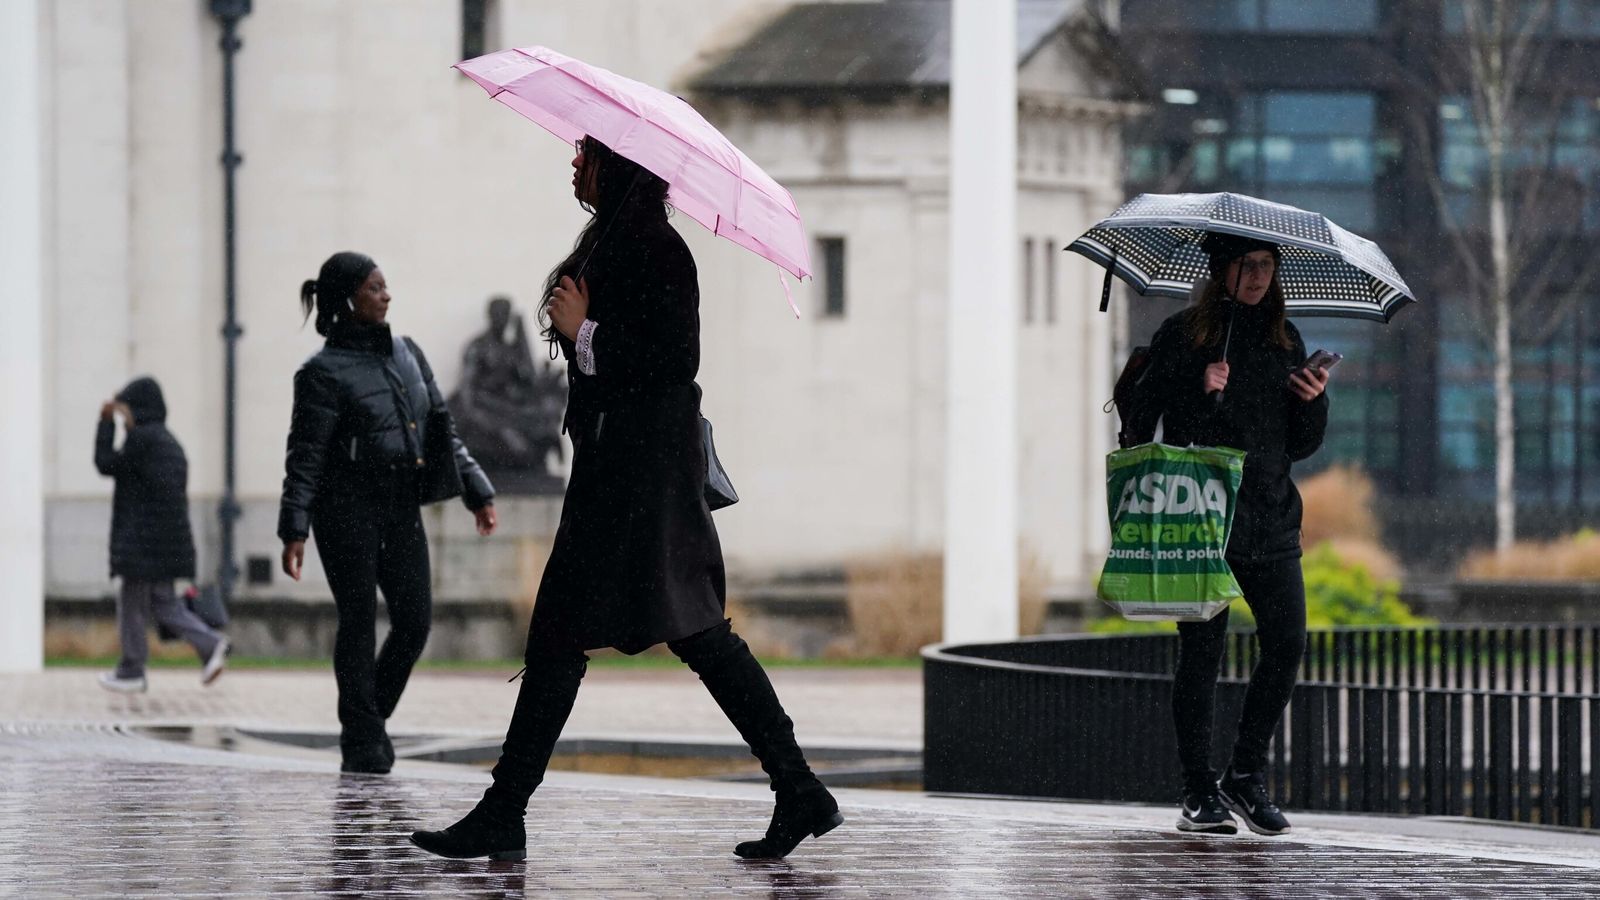 Met Office data shows March was England's wettest in 40 years